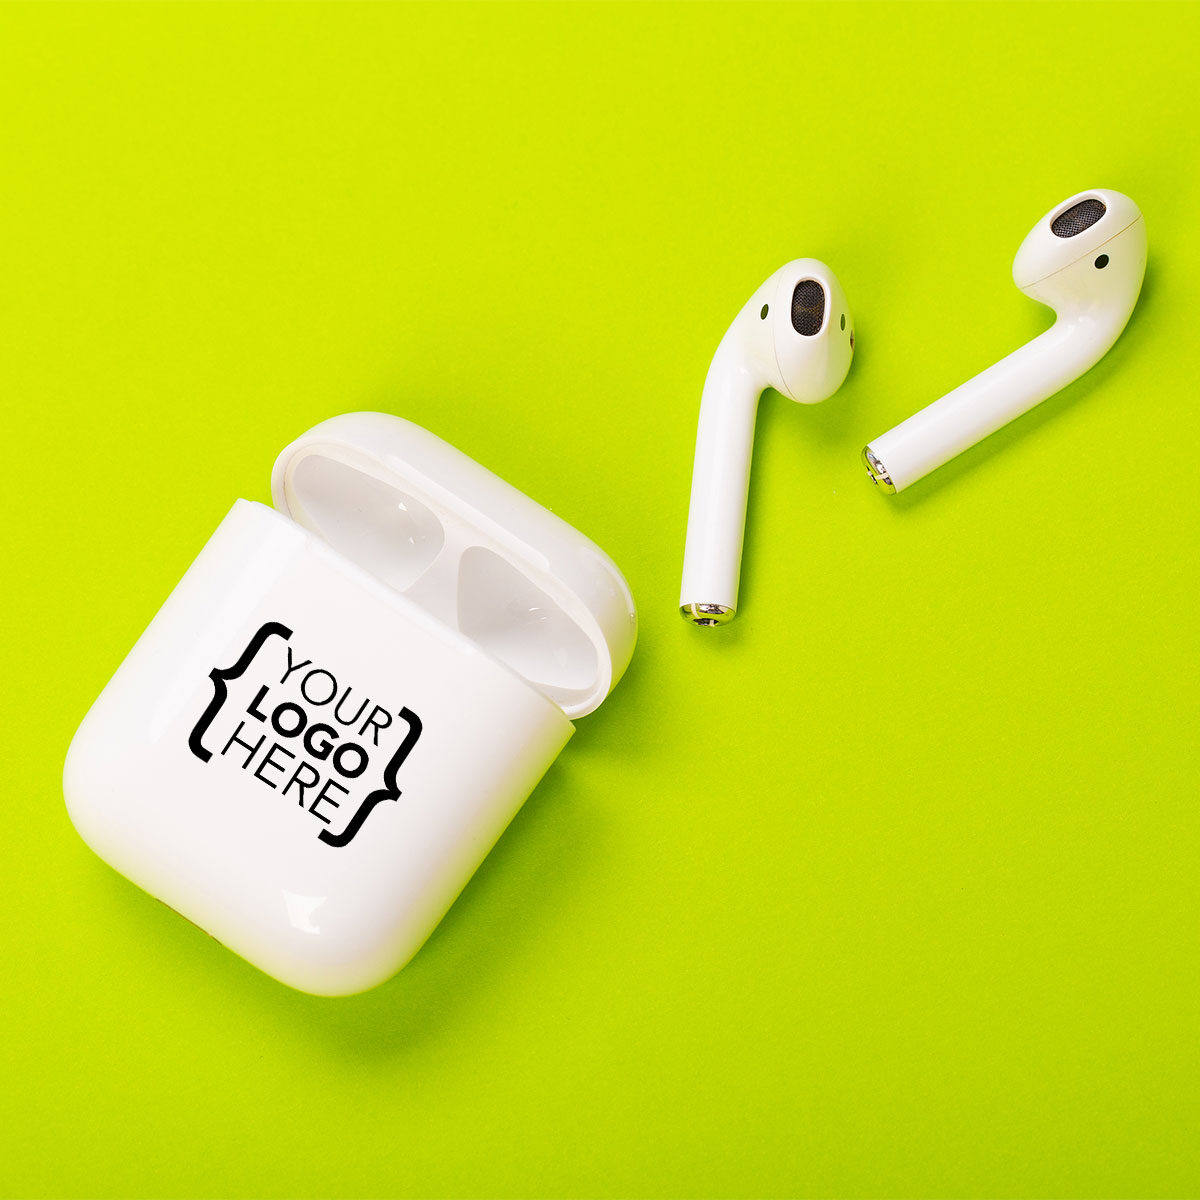 Apple AirPods with logo imprint